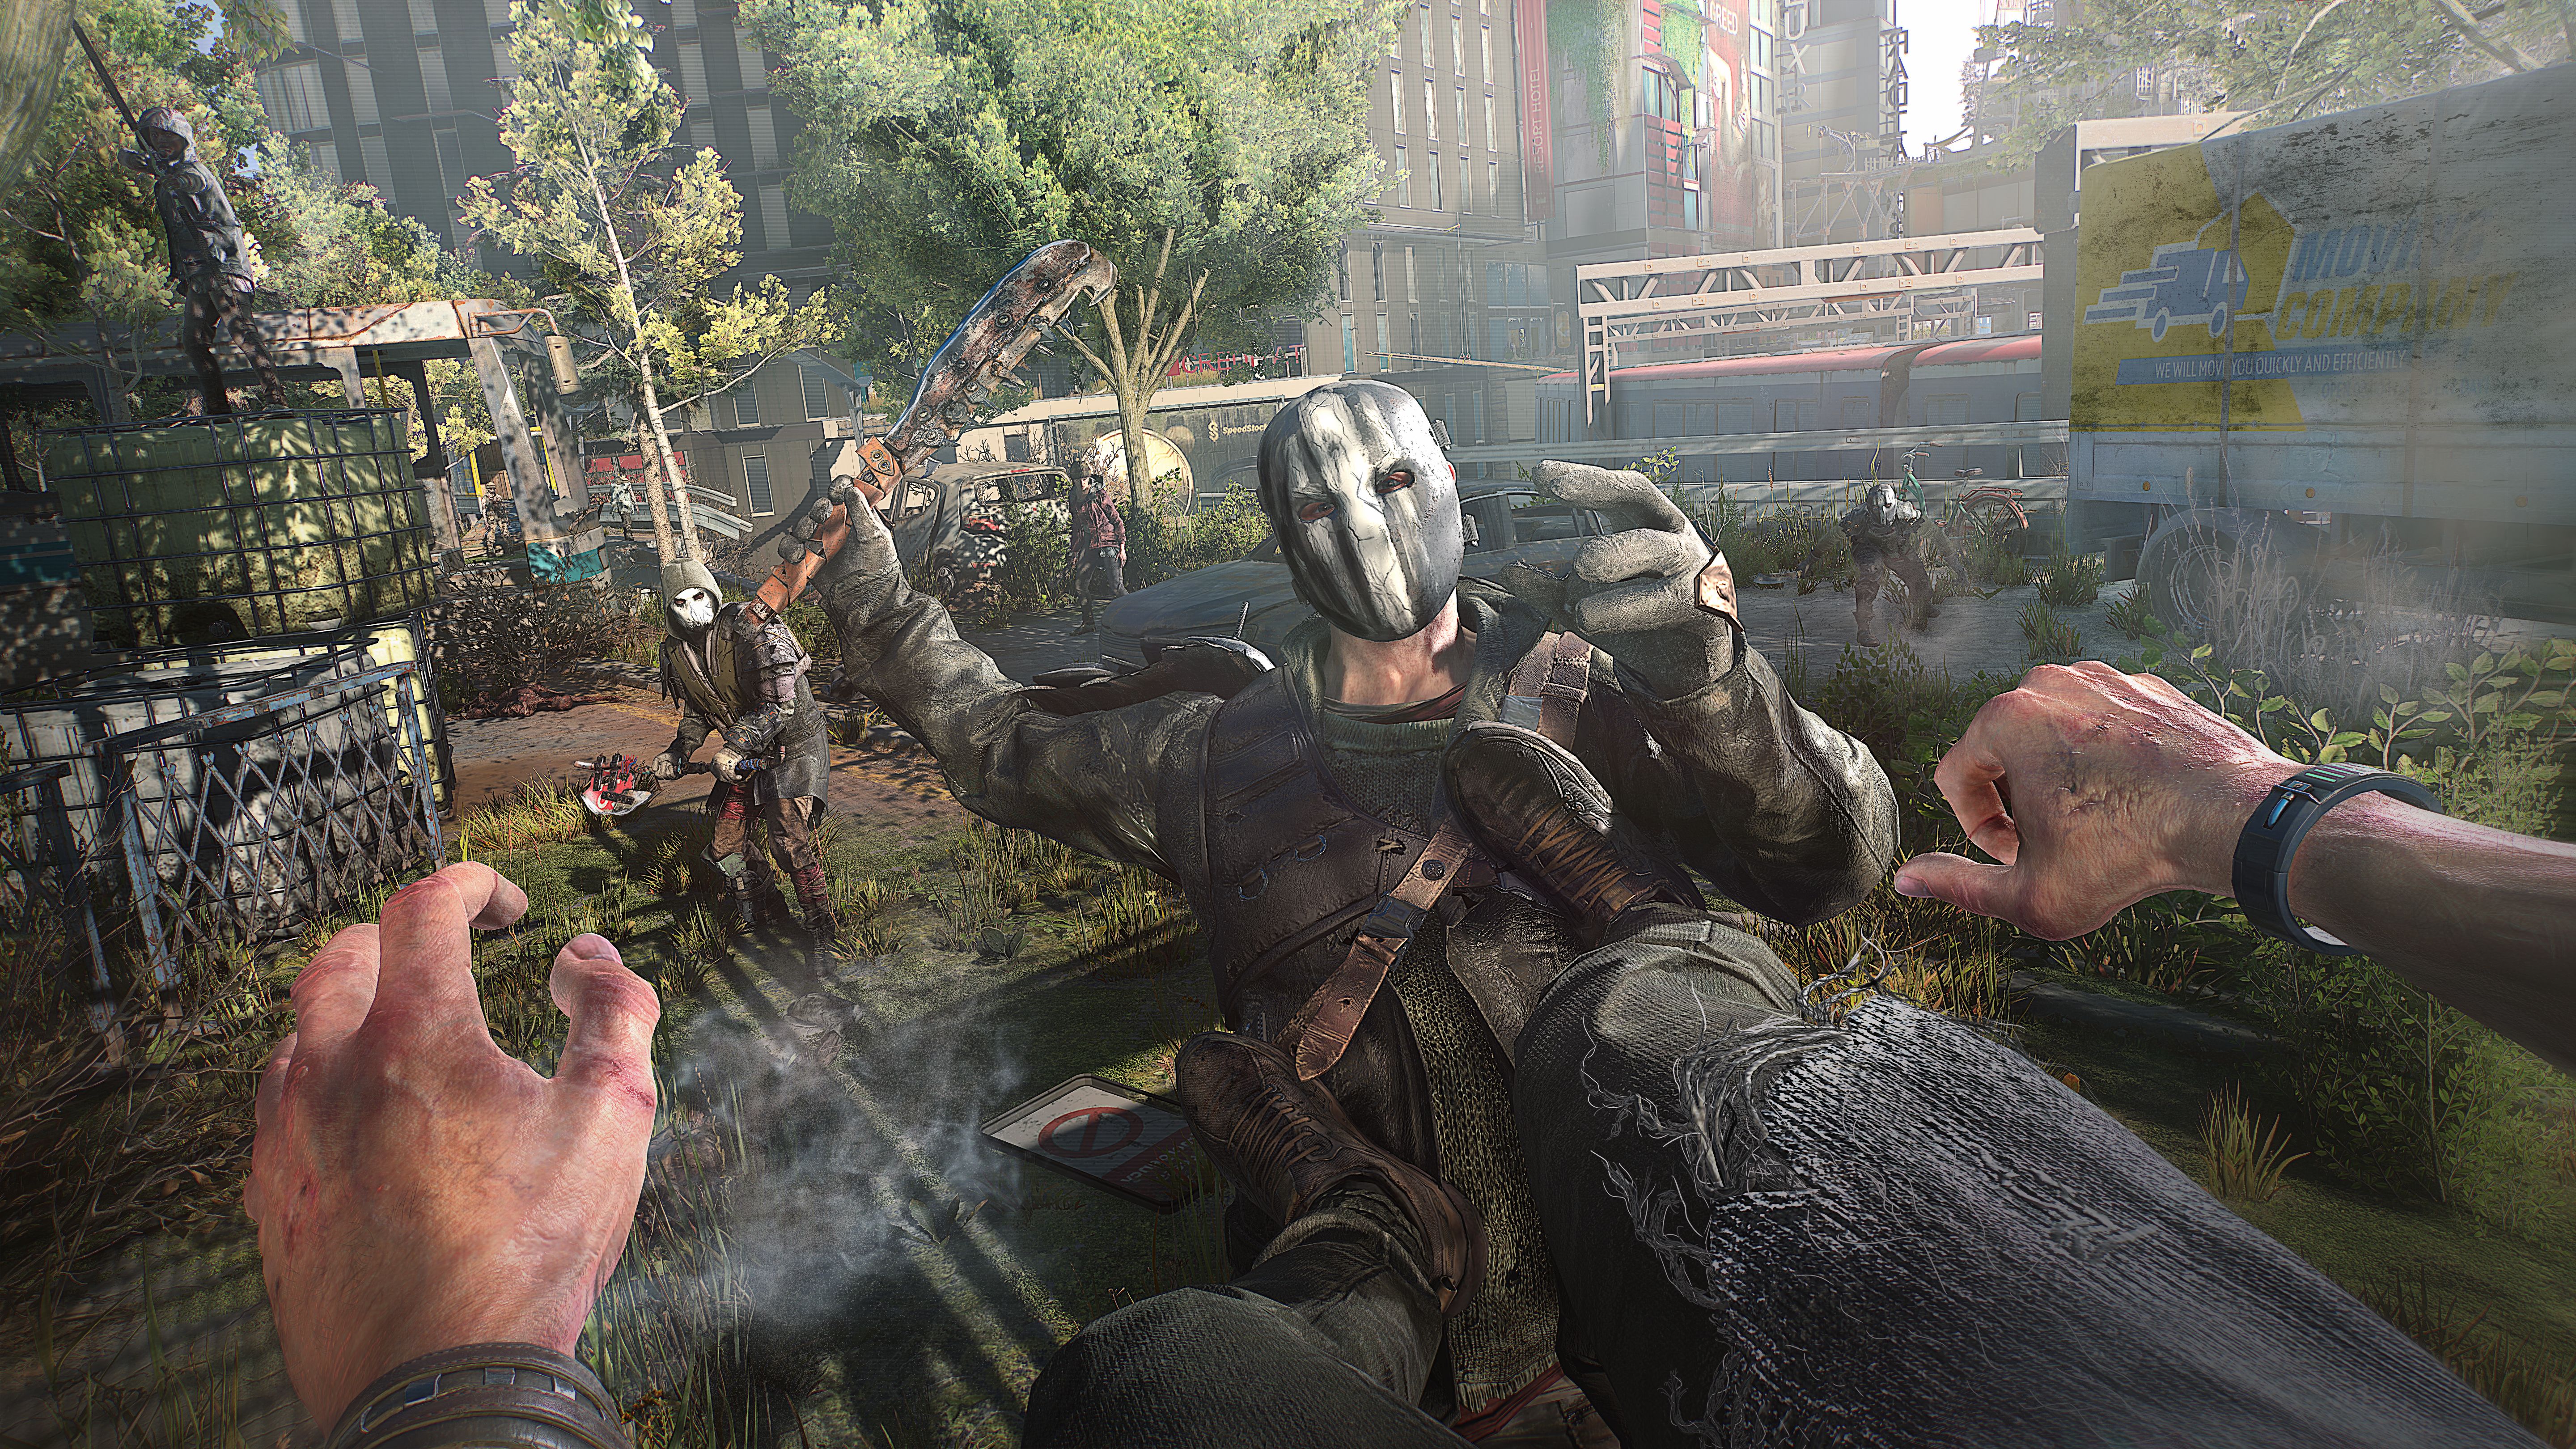 Aemilius Cupero News: A promotional screenshot from a preview of Dying Light 2, showing the protagonist's first person view as they double-kick a bandit in the chest